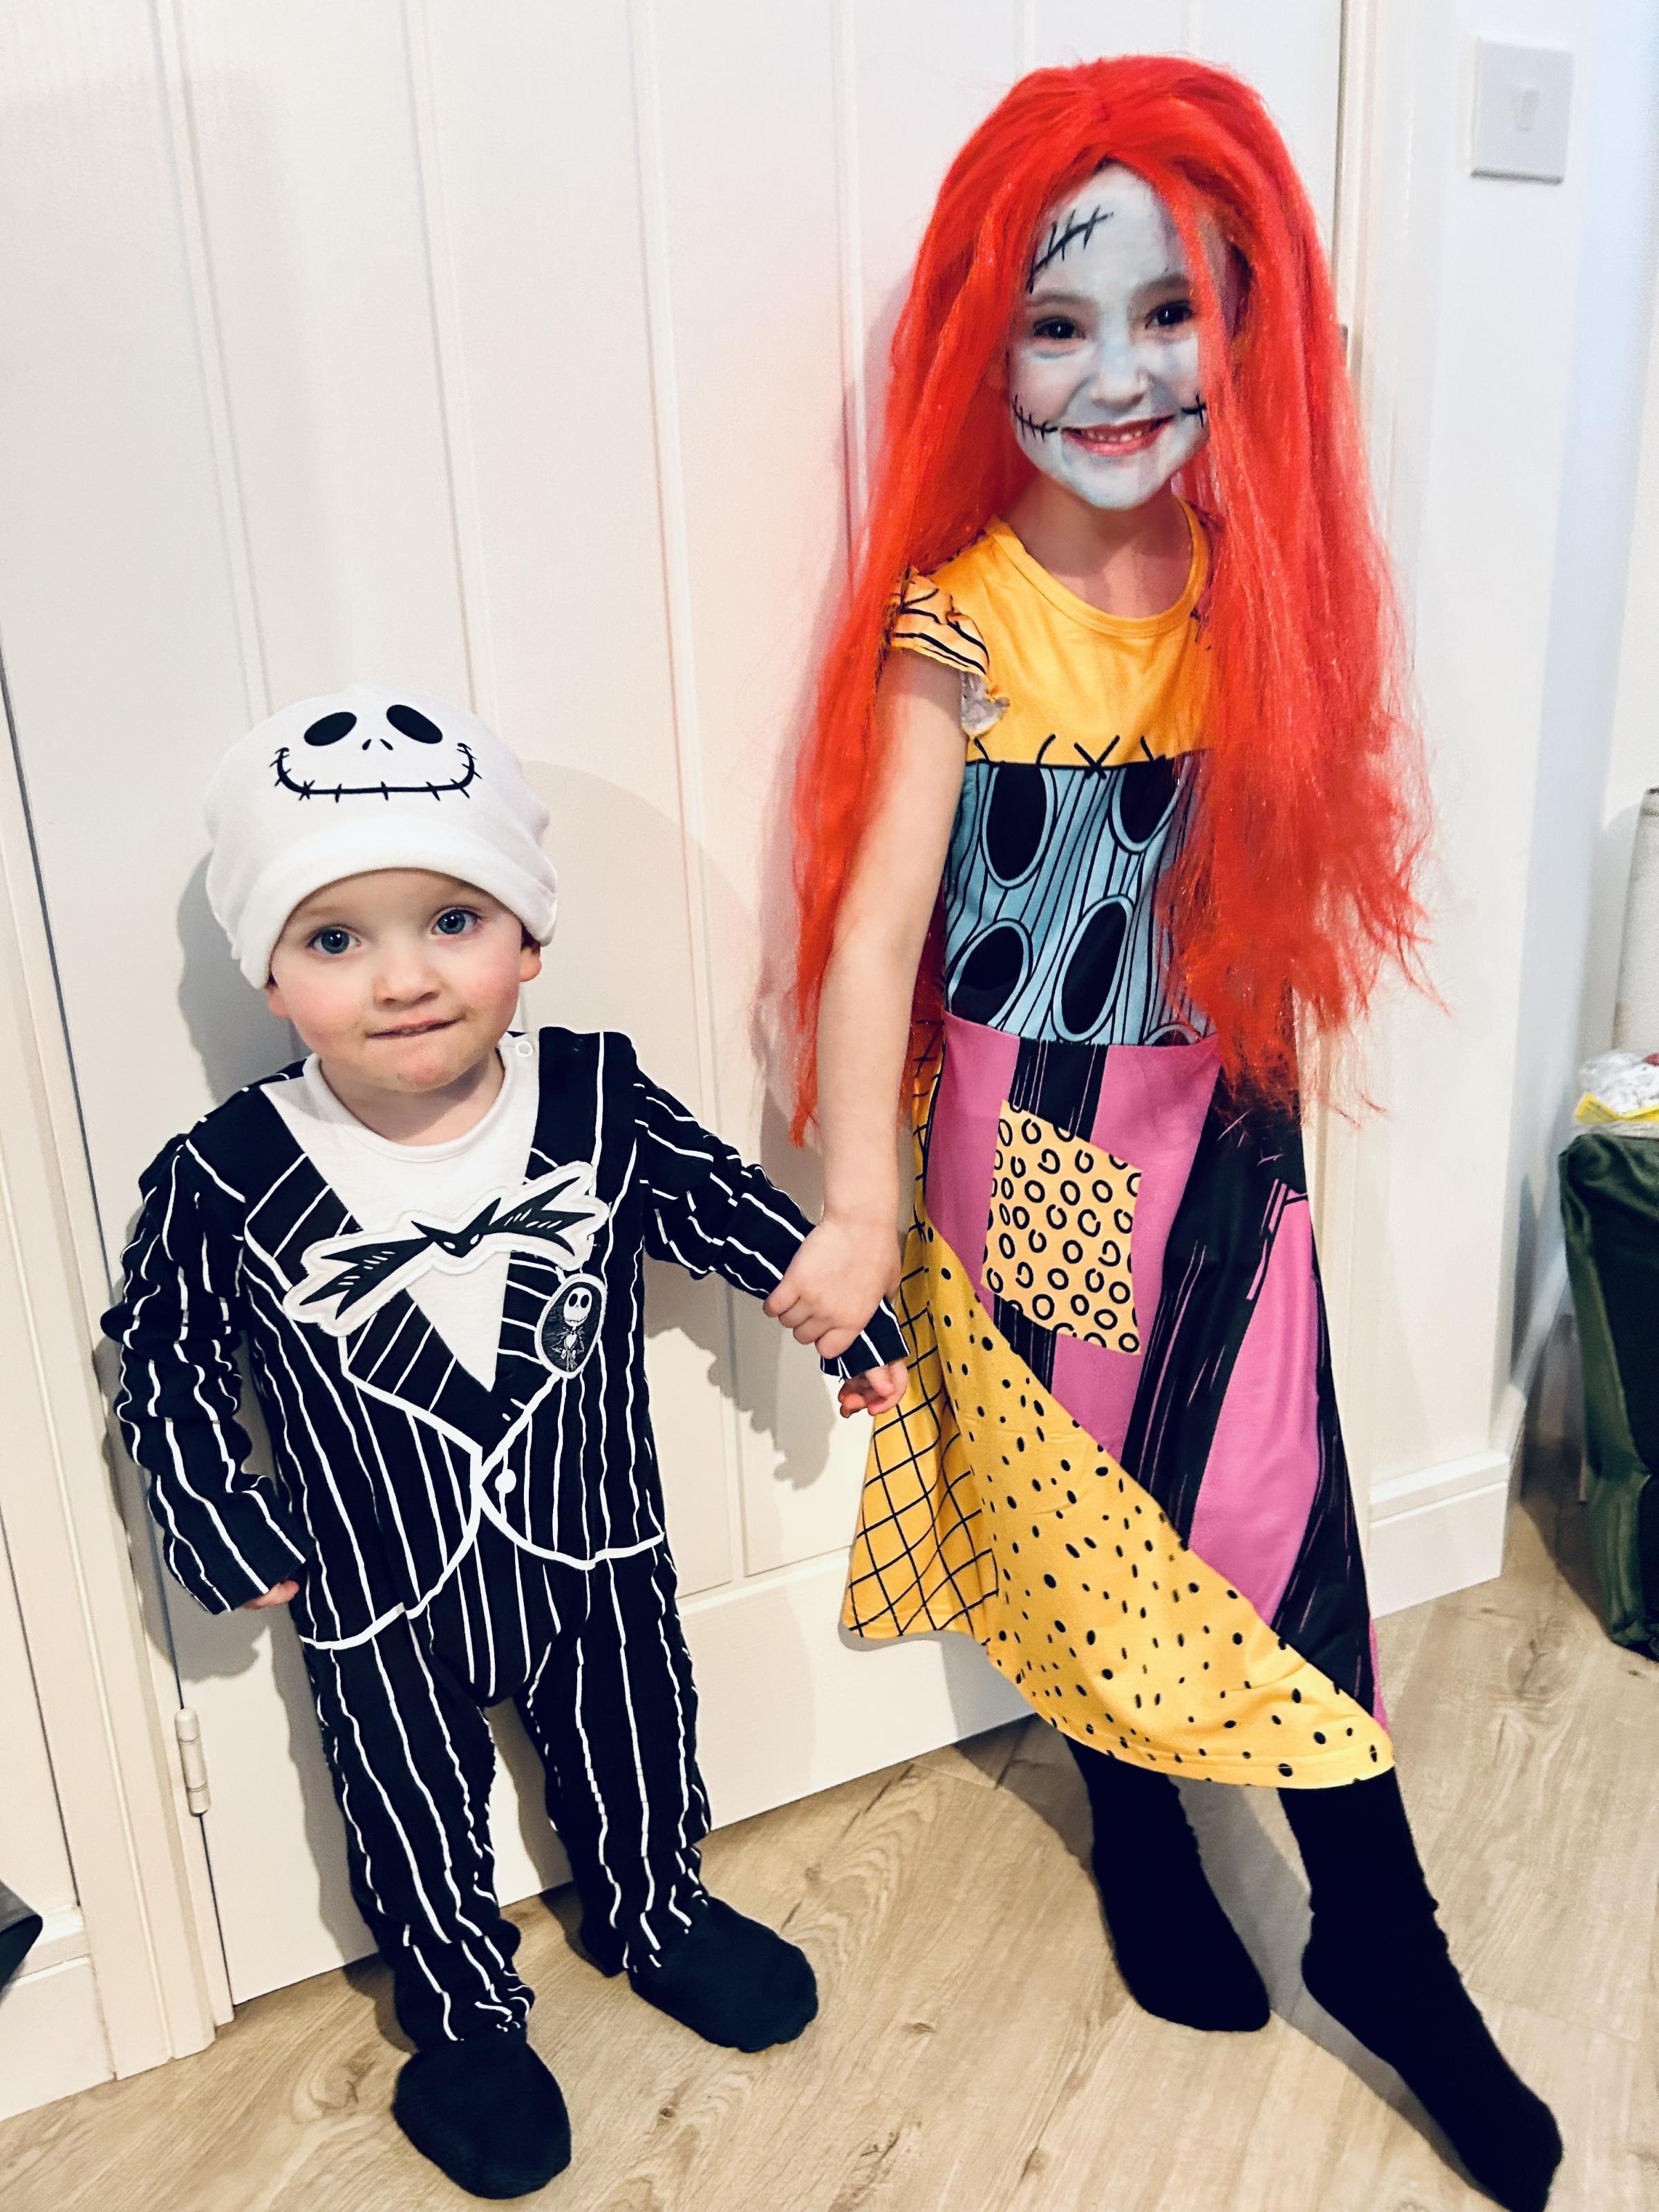 Freddie and Florence Hannon from Winsford ready for a Halloween party dressed as Jack Skellington and Sally from The Nightmare Before Christmas